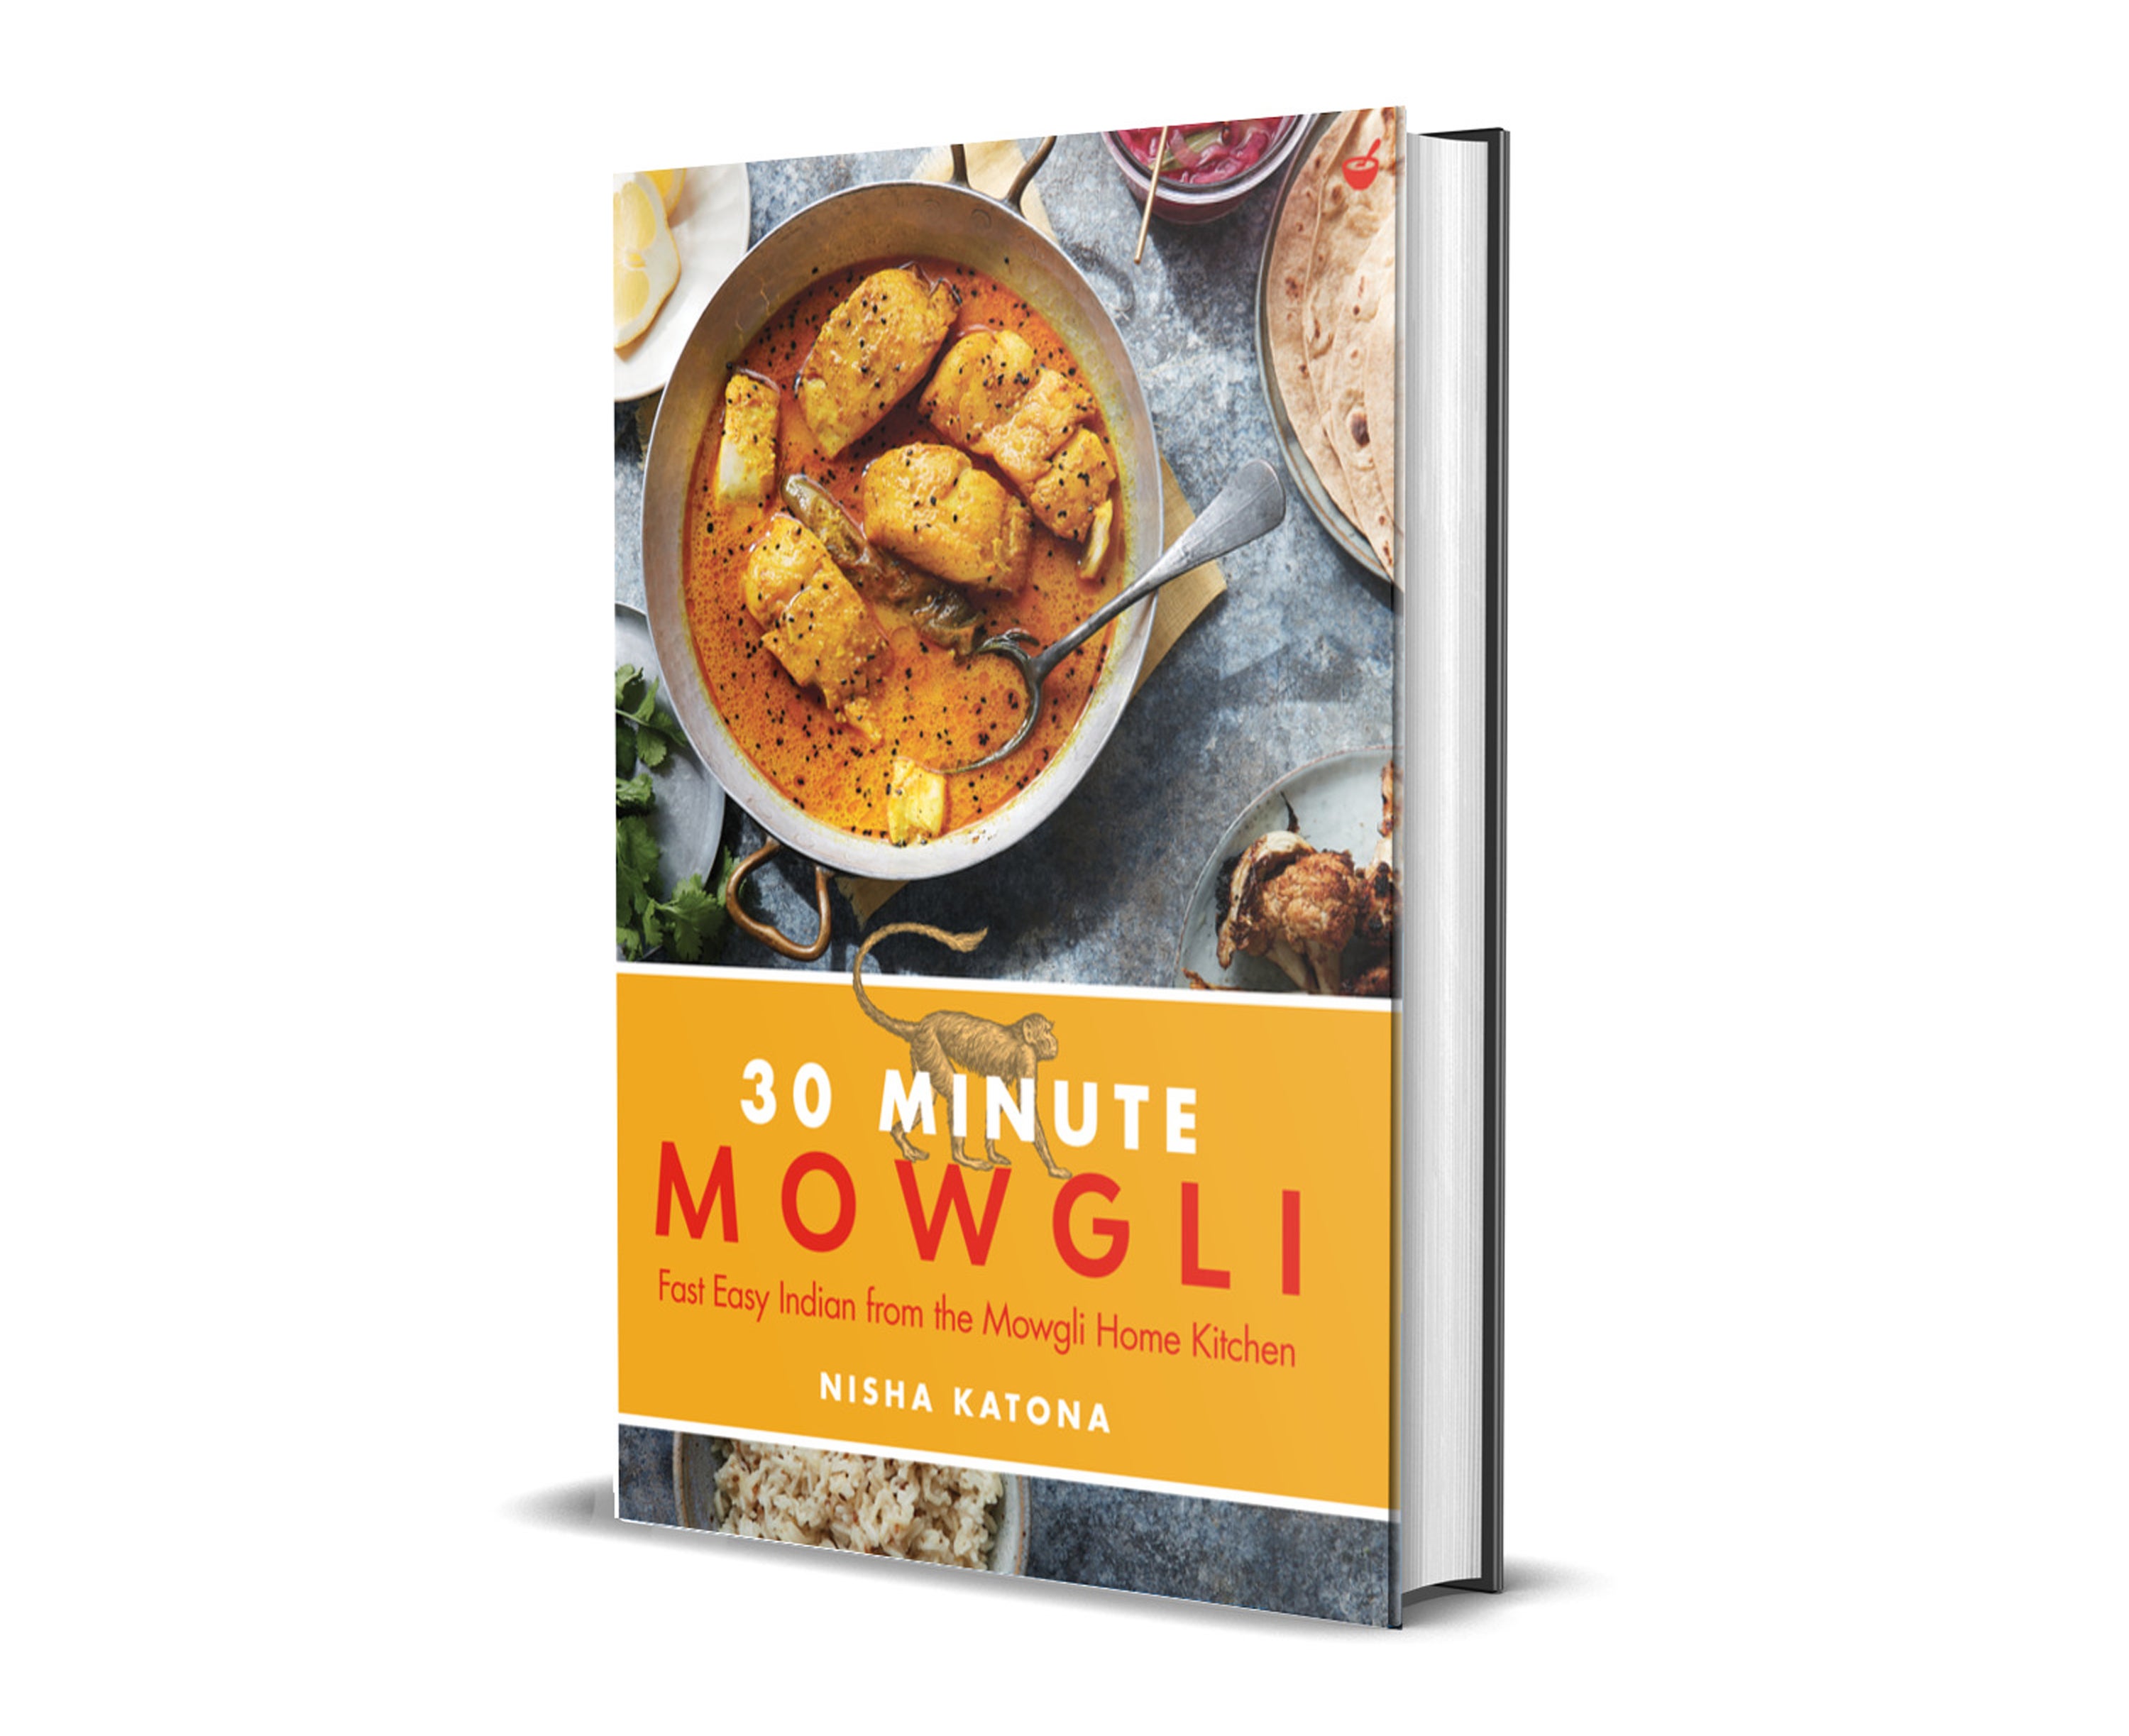 The book is filled with recipes Katona cooks at home